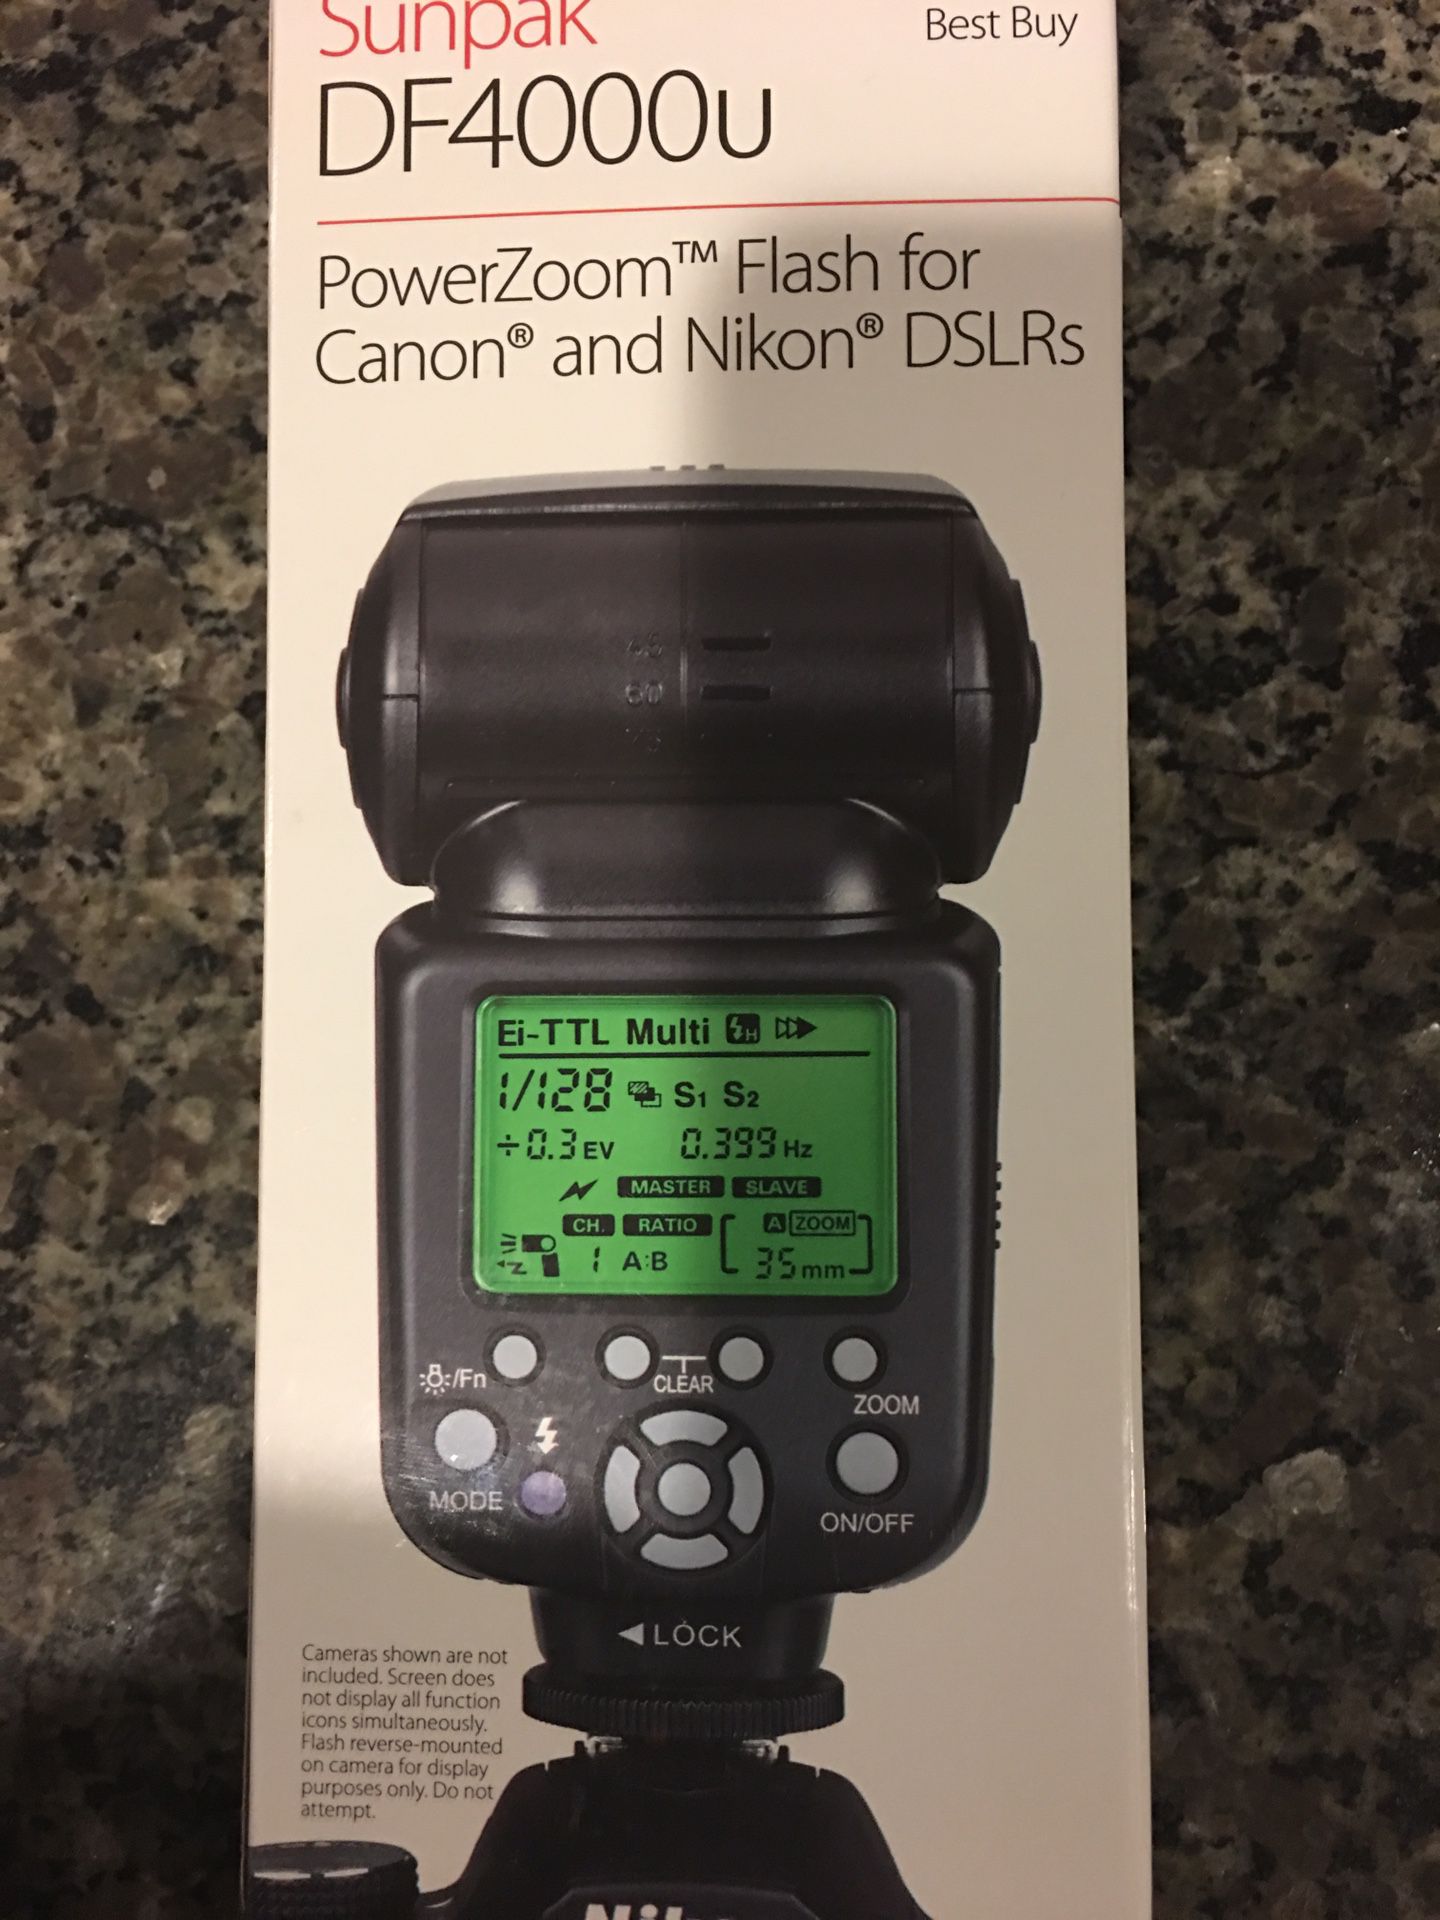 PowerZoom Flash for Canon and Nikon DSLRs